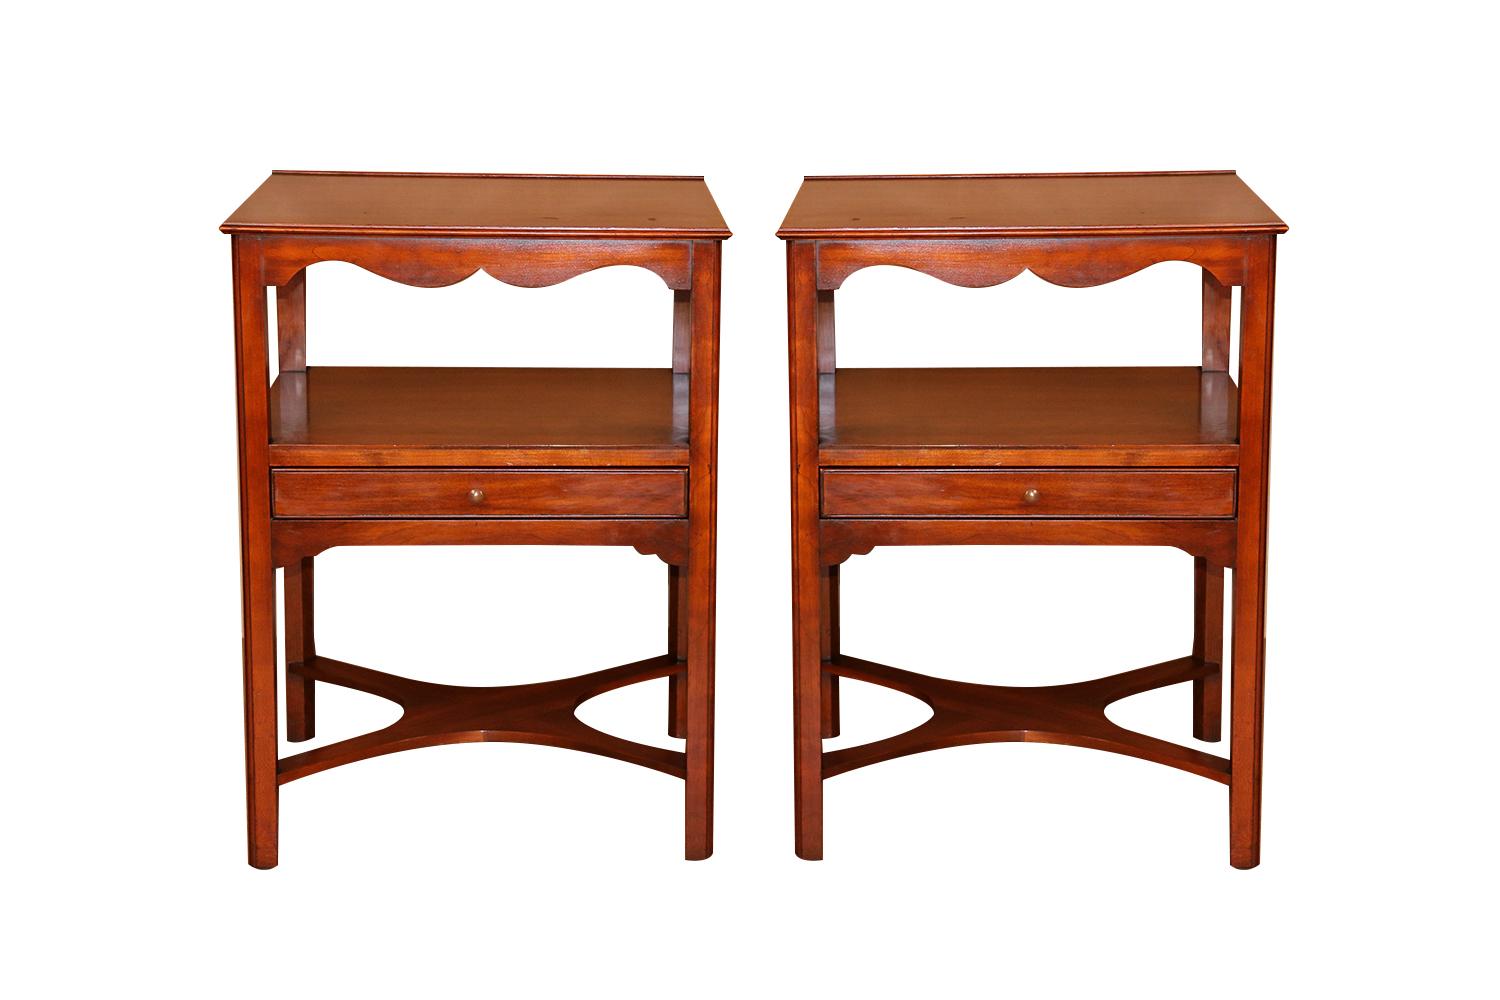 An exceedingly fine pair of matching, solid wild black cherry two tier nightstands/ side tables by Henkel Harris, Virginia Galleries collection, crafted of solid wild black cherry, beautiful form. Each features a square top with shaped apron above a